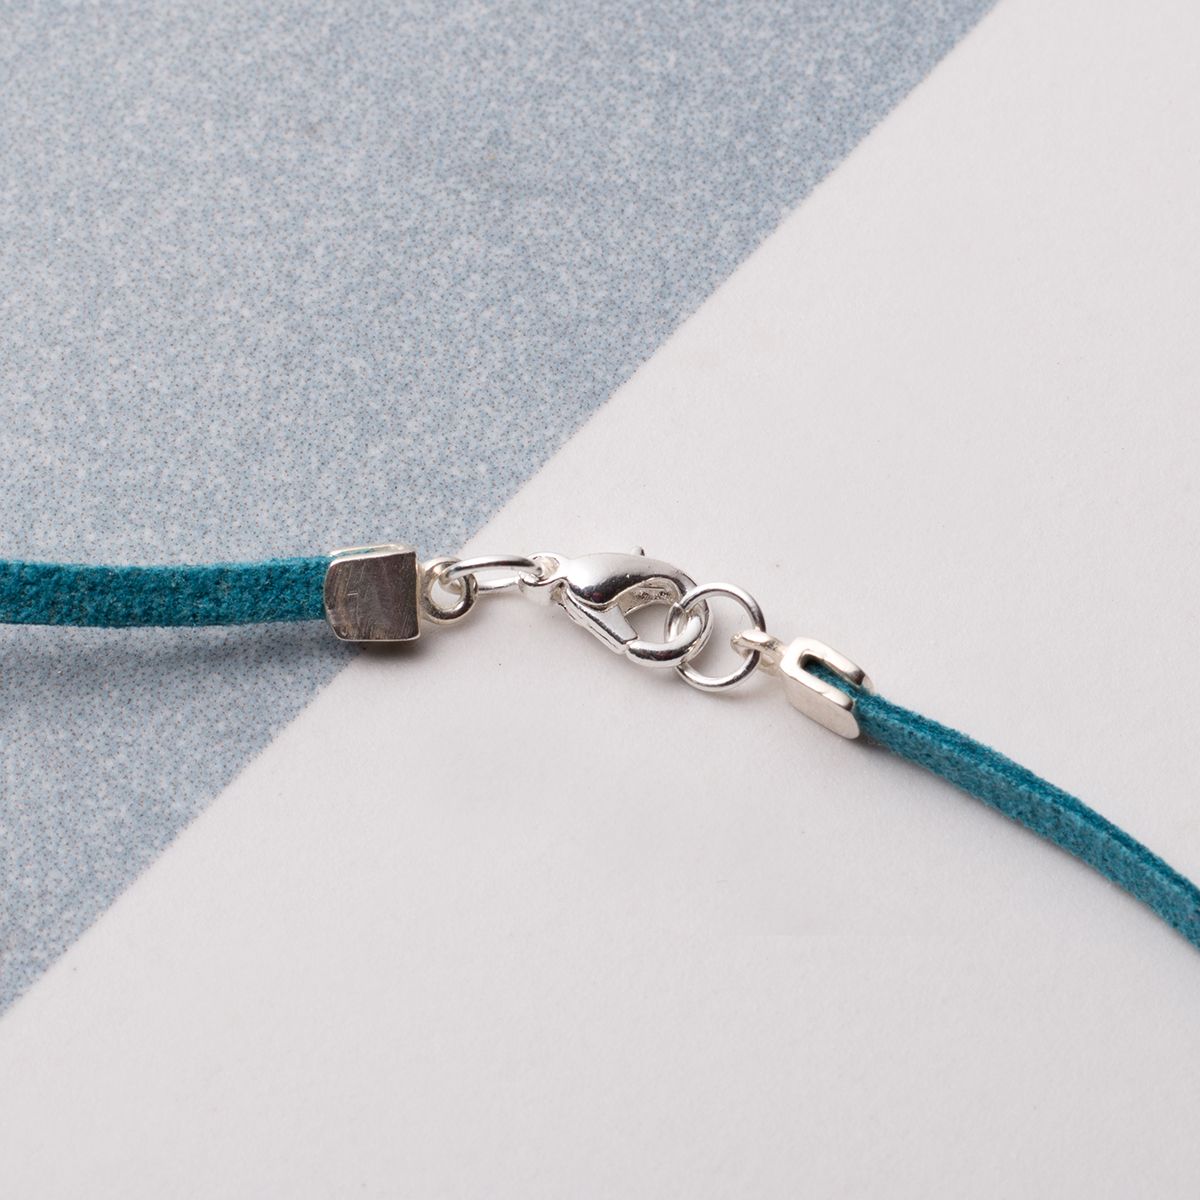 How to Make the Easiest Hook Clasp – Basket of Blue